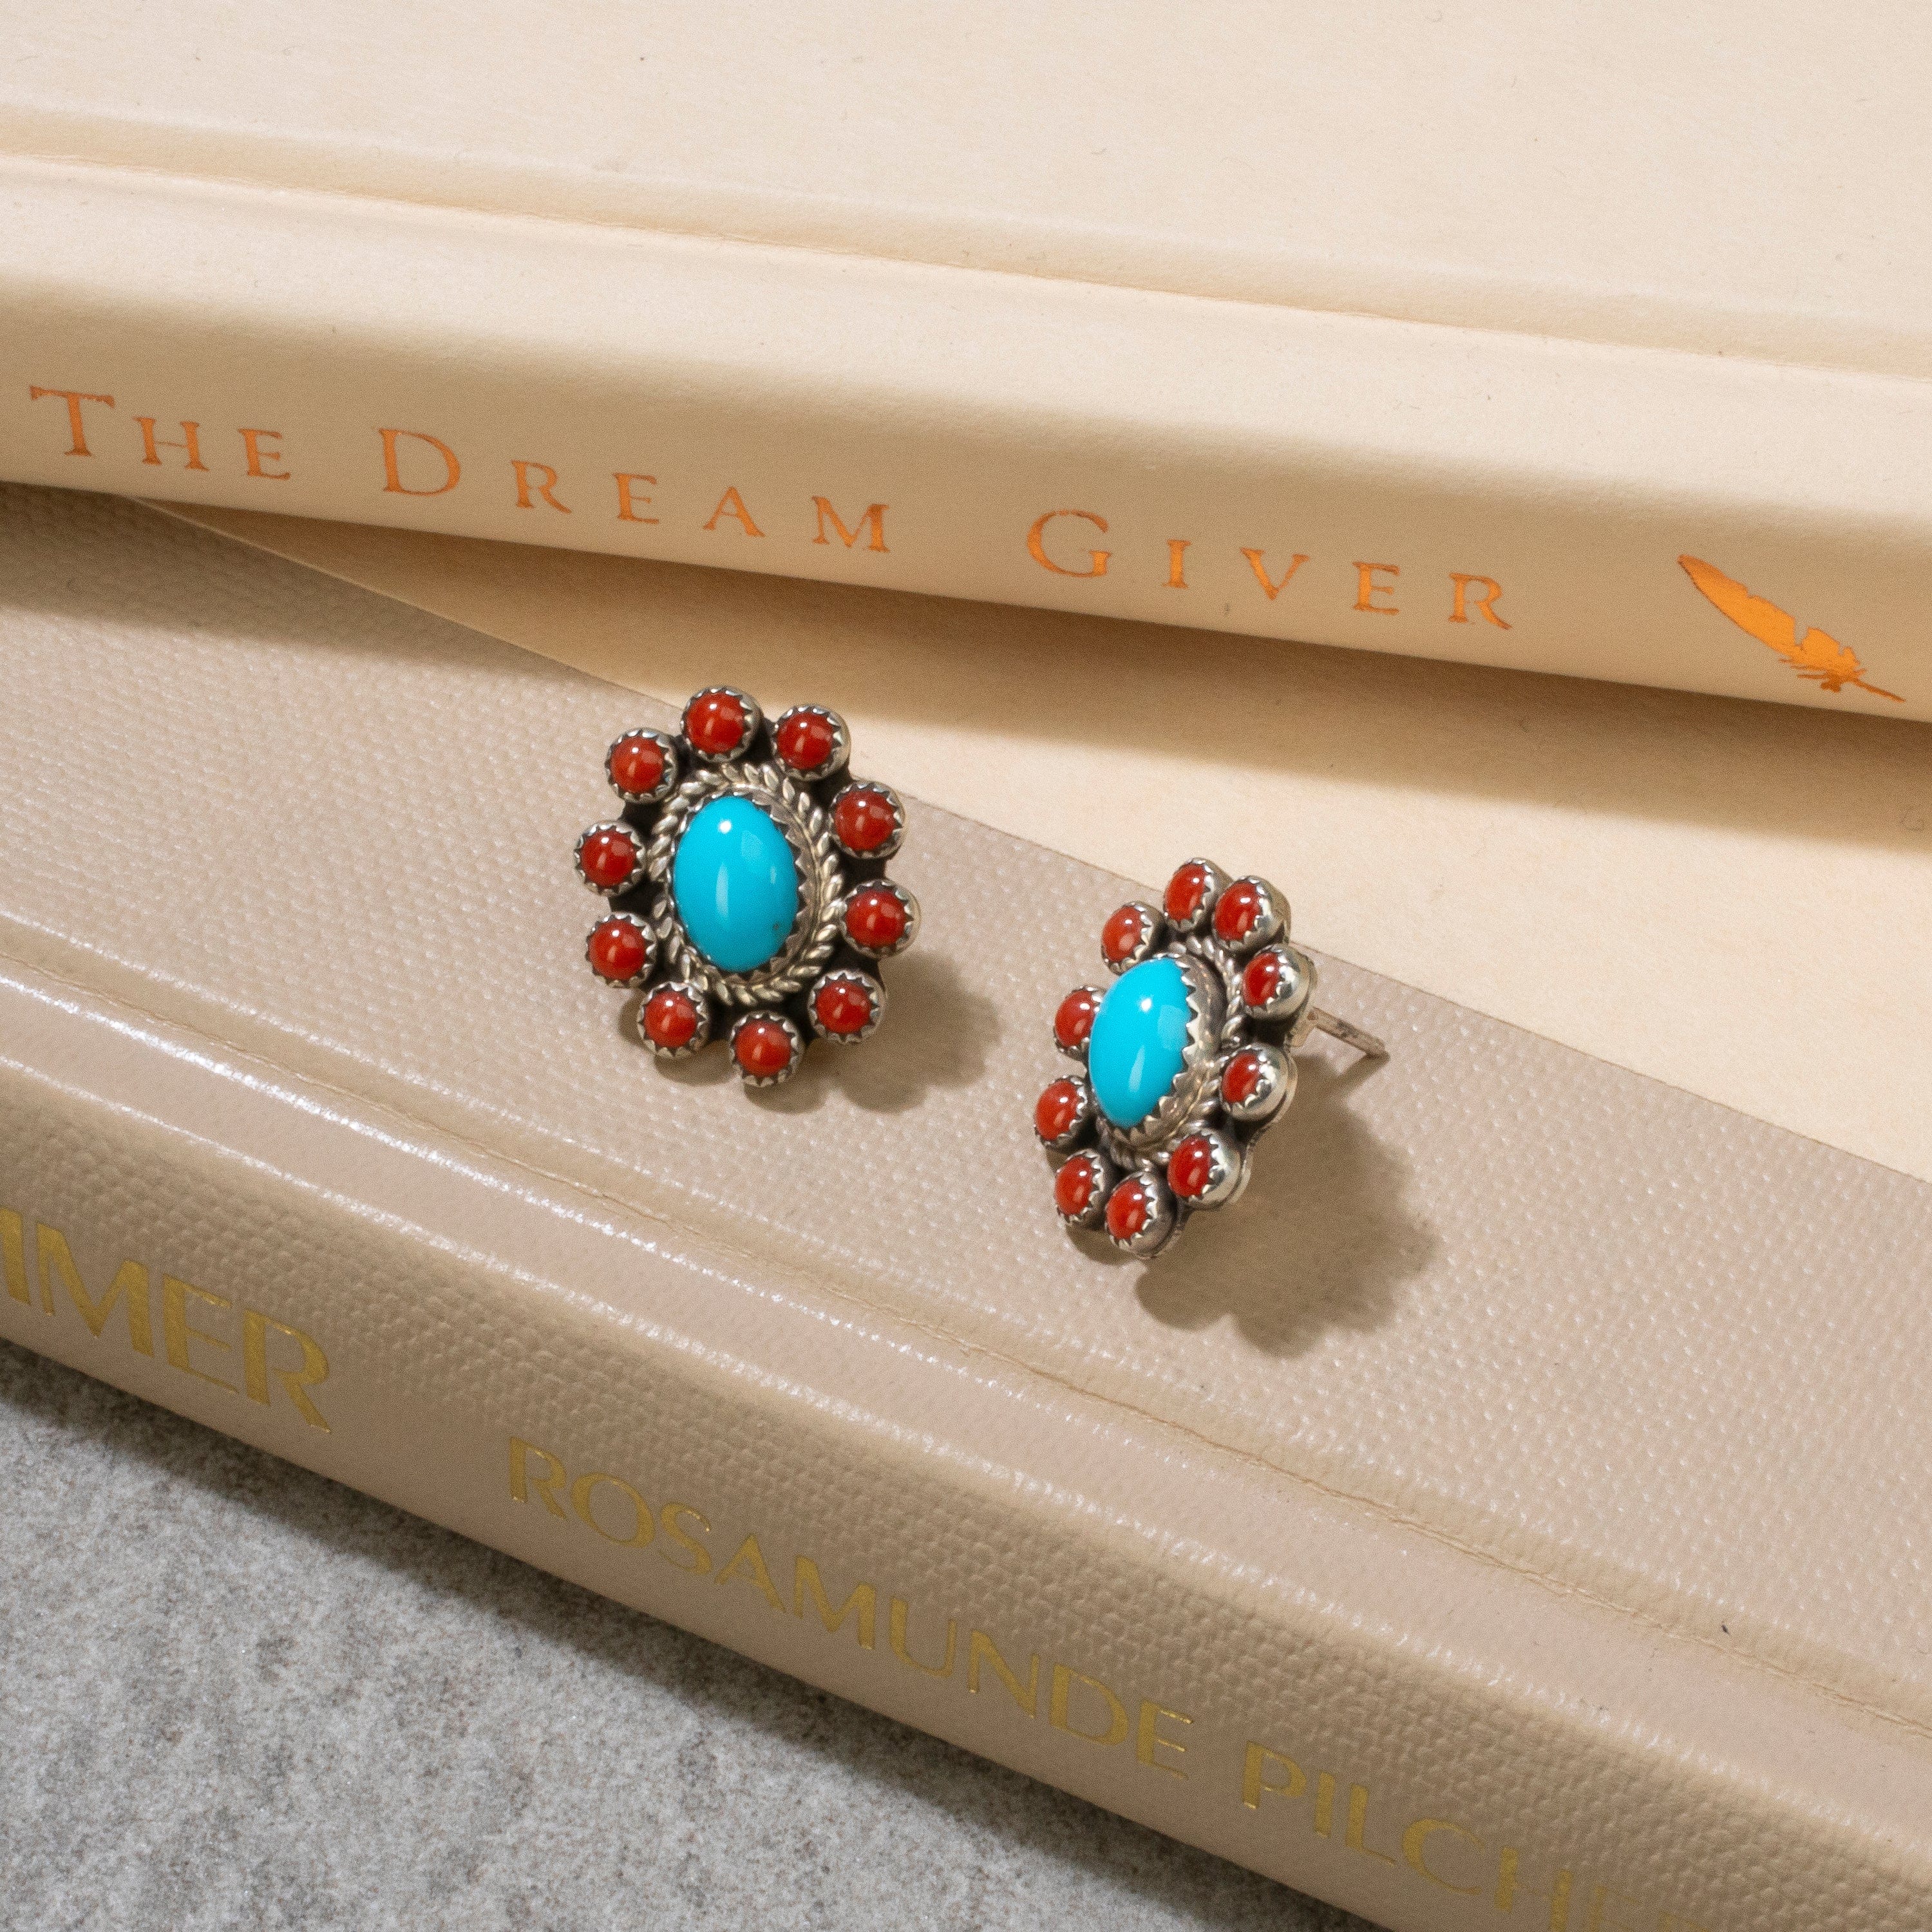 Kalifano Native American Jewelry Sleeping Beauty Turquoise & Red Coral Flower Navajo USA Native American Made 925 Sterling Silver Earrings with Stud Backing NAE400.042